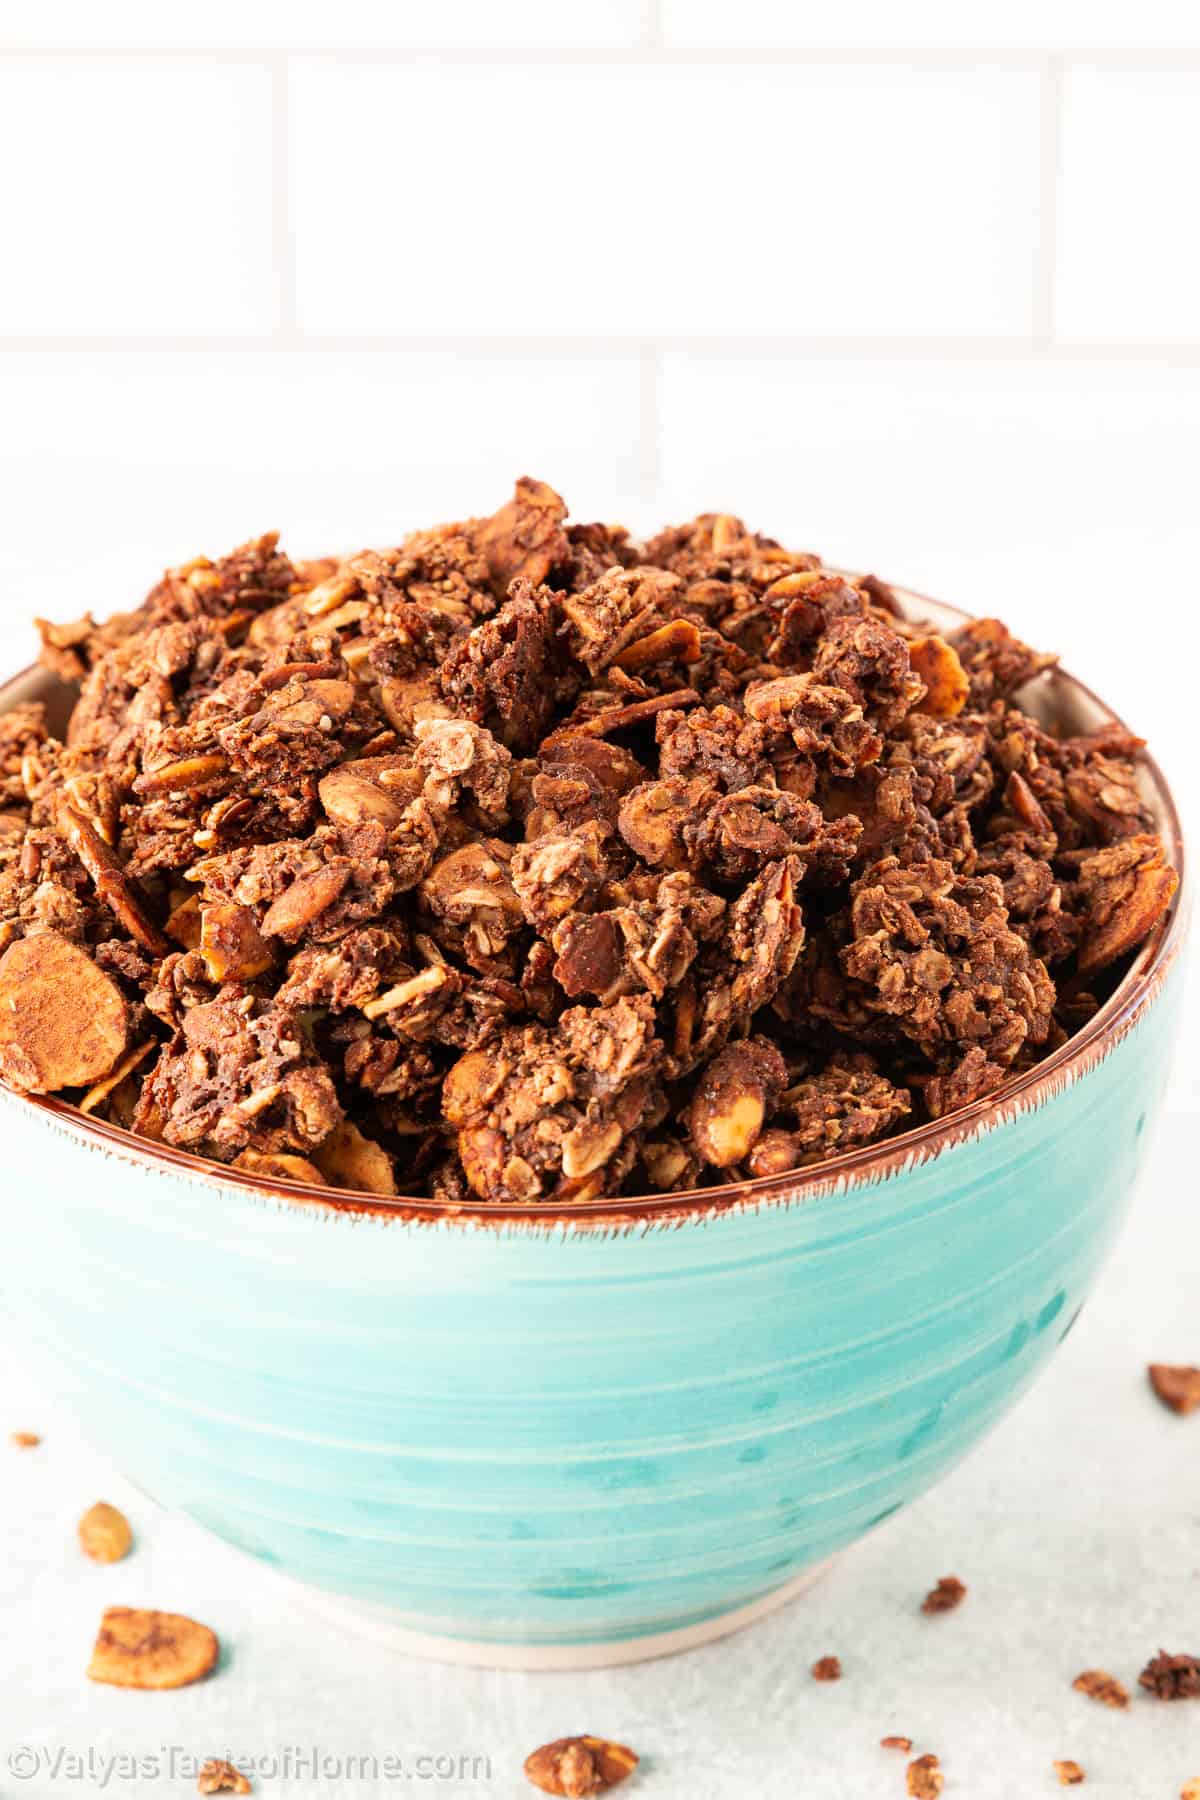 This easy Chocolate Granola recipe is super delicious and is made with healthy ingredients like oats, nuts, cacao, and maple for the perfect breakfast or snack!